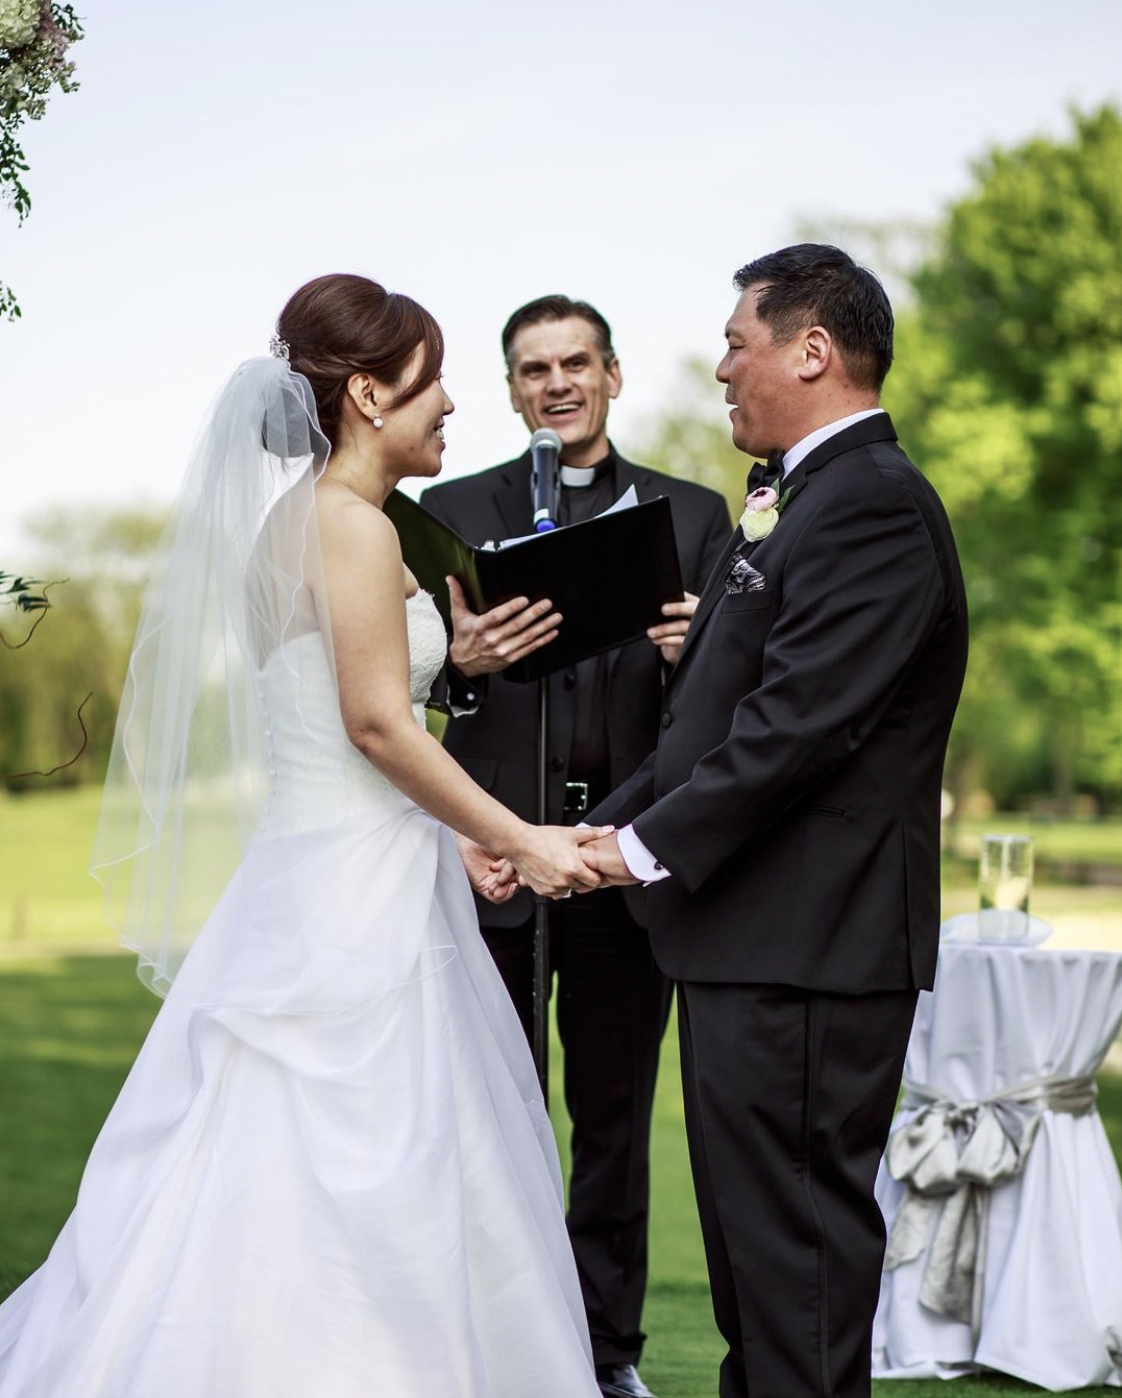 Bride and groom smile while taking their vows